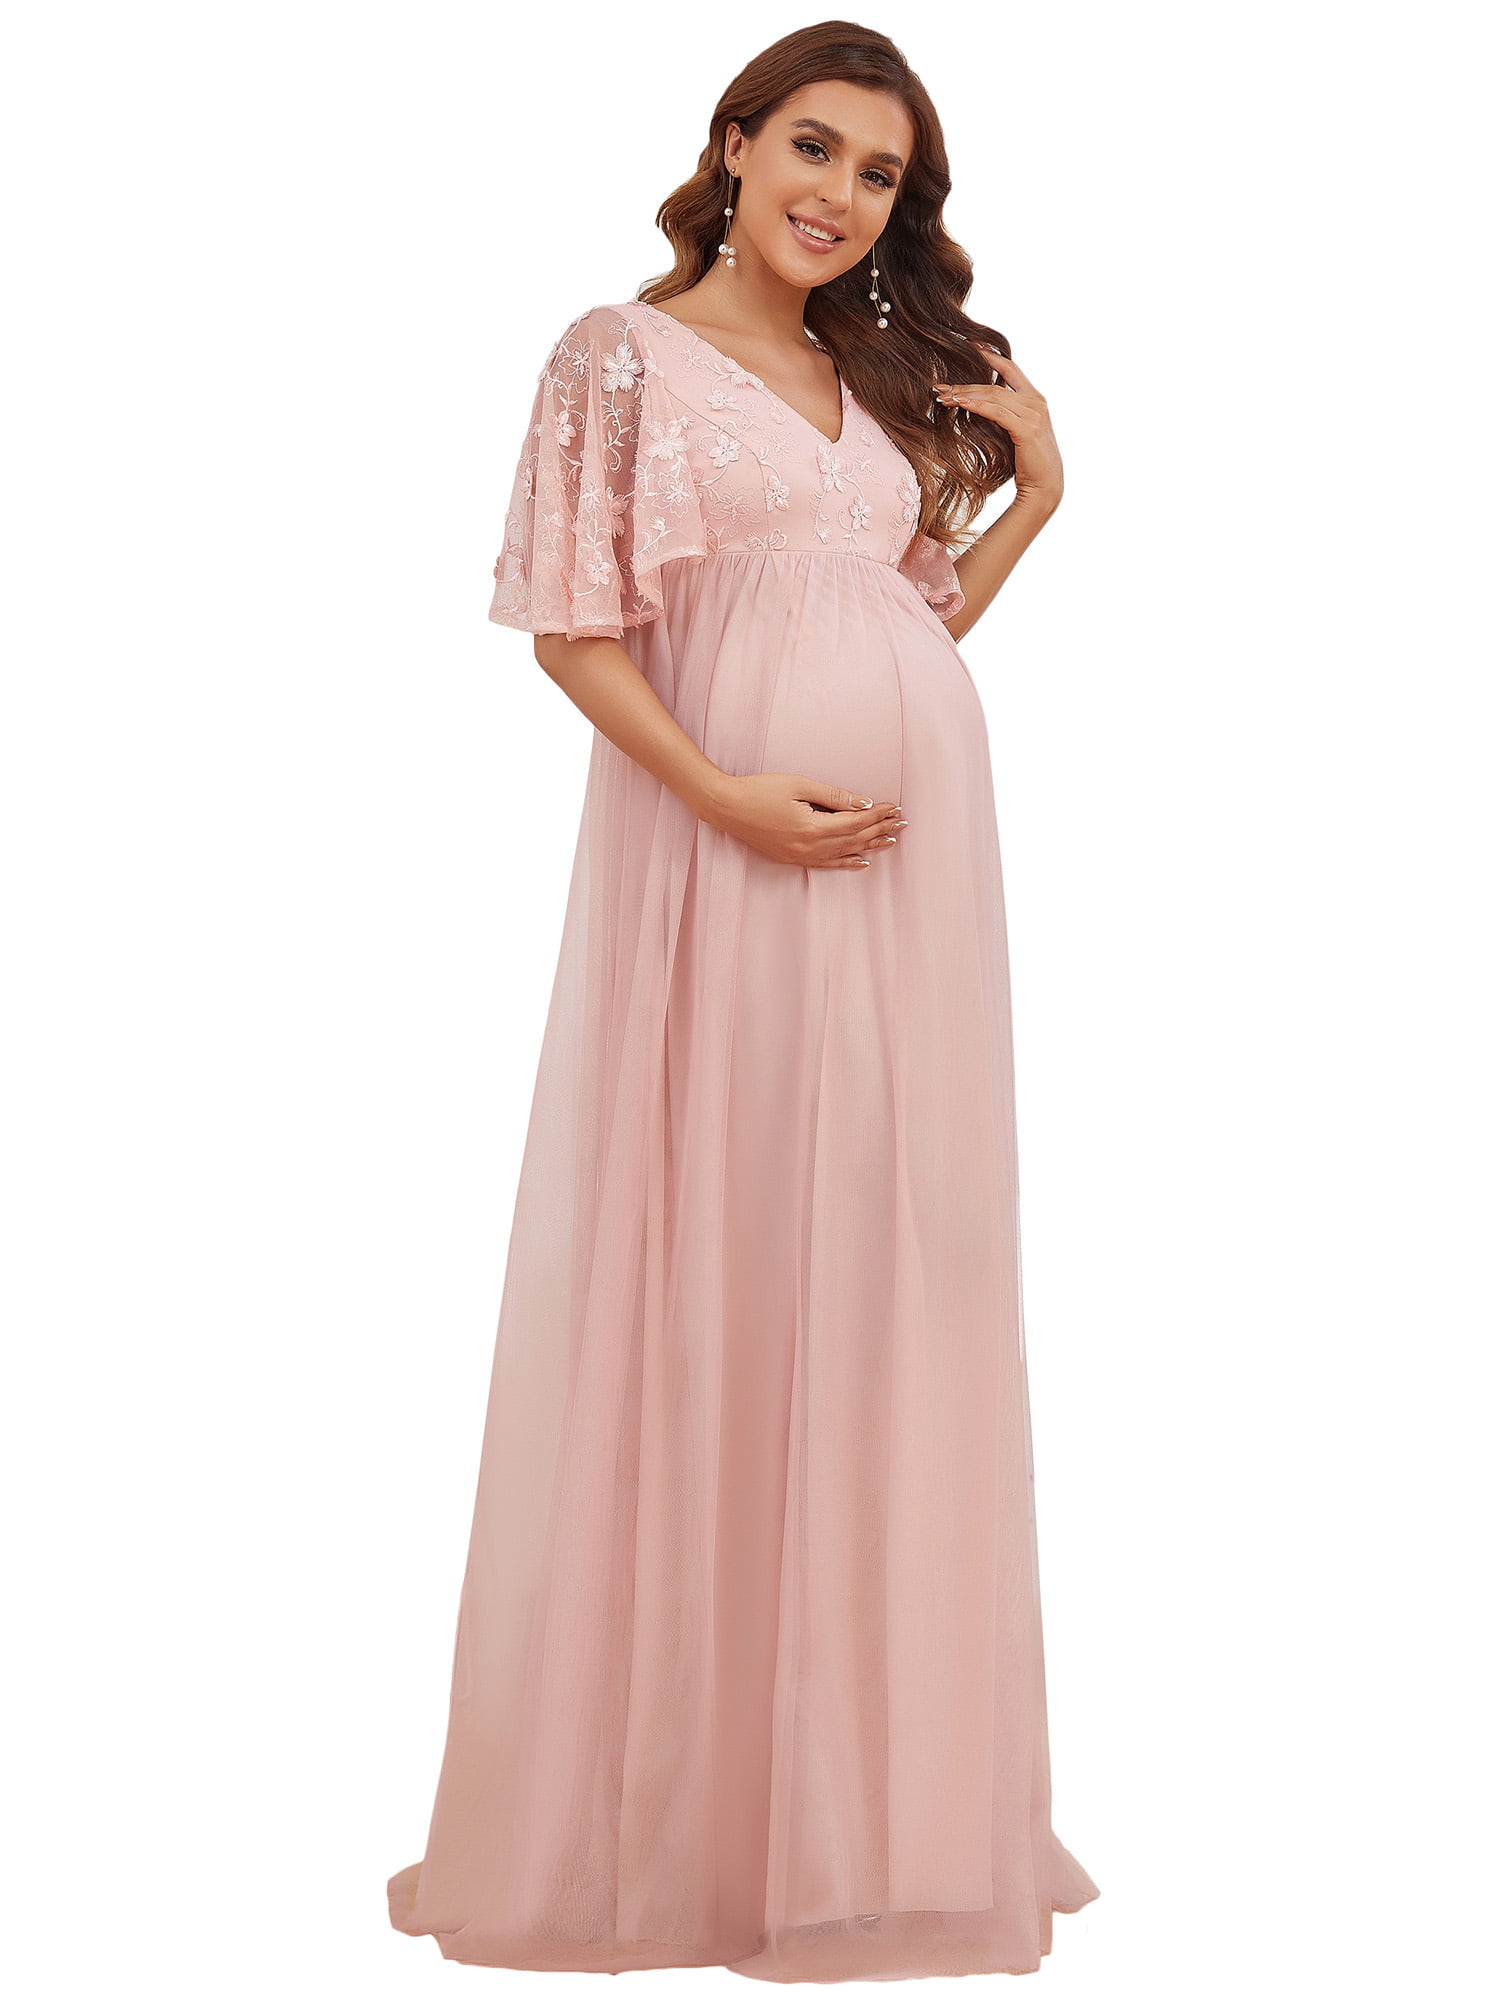 Ever-Pretty Women's Long Sleeve Lace Wrapped Ruched Maxi Chiffon Maternity Party Dress 7412-YF